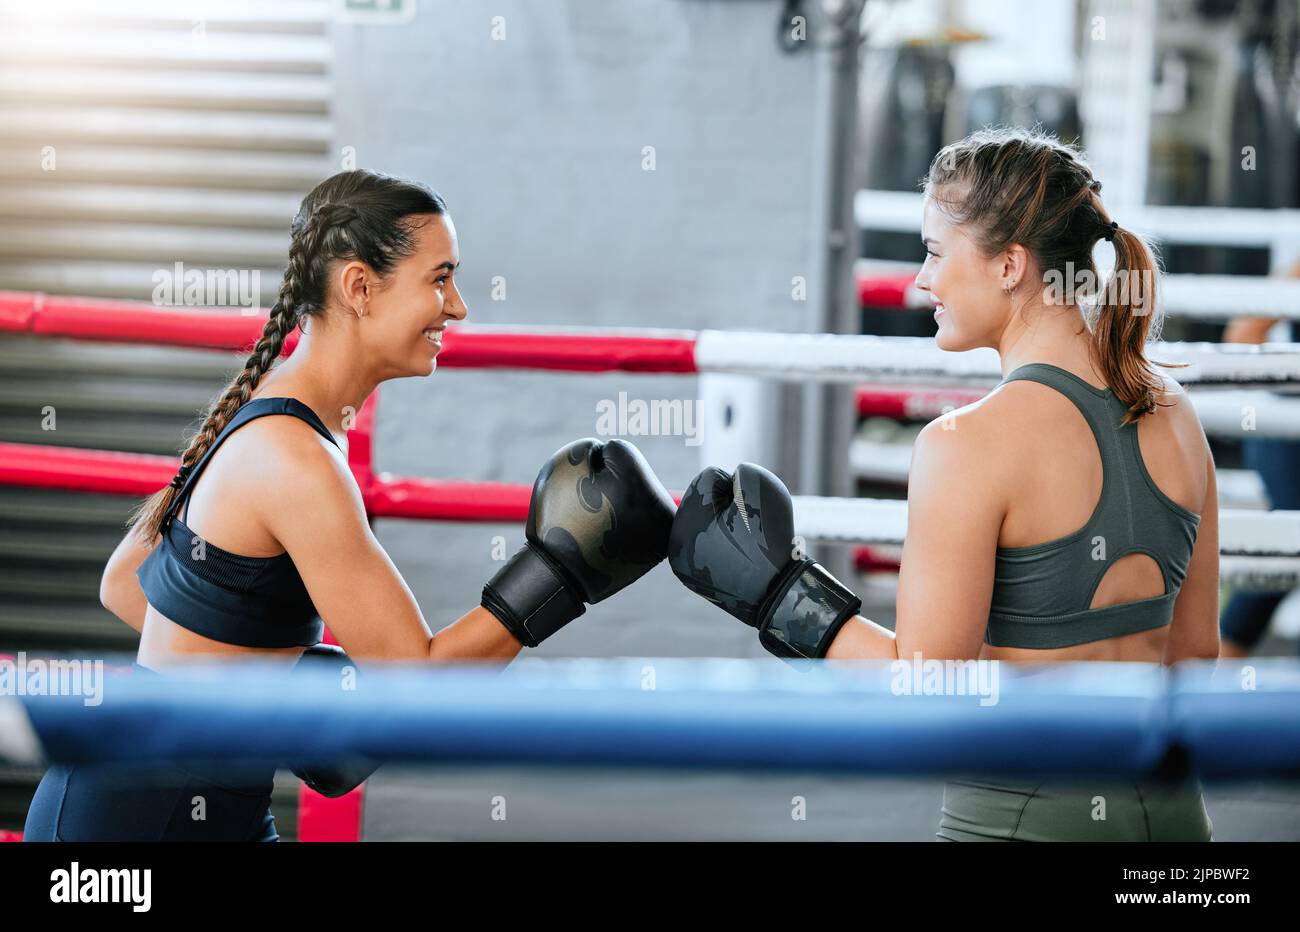 Boxing women, healthy and athletic sparring indoors. Beautiful sporty girls keep active with friendly competition through fitness and exercise. Happy Stock Photo